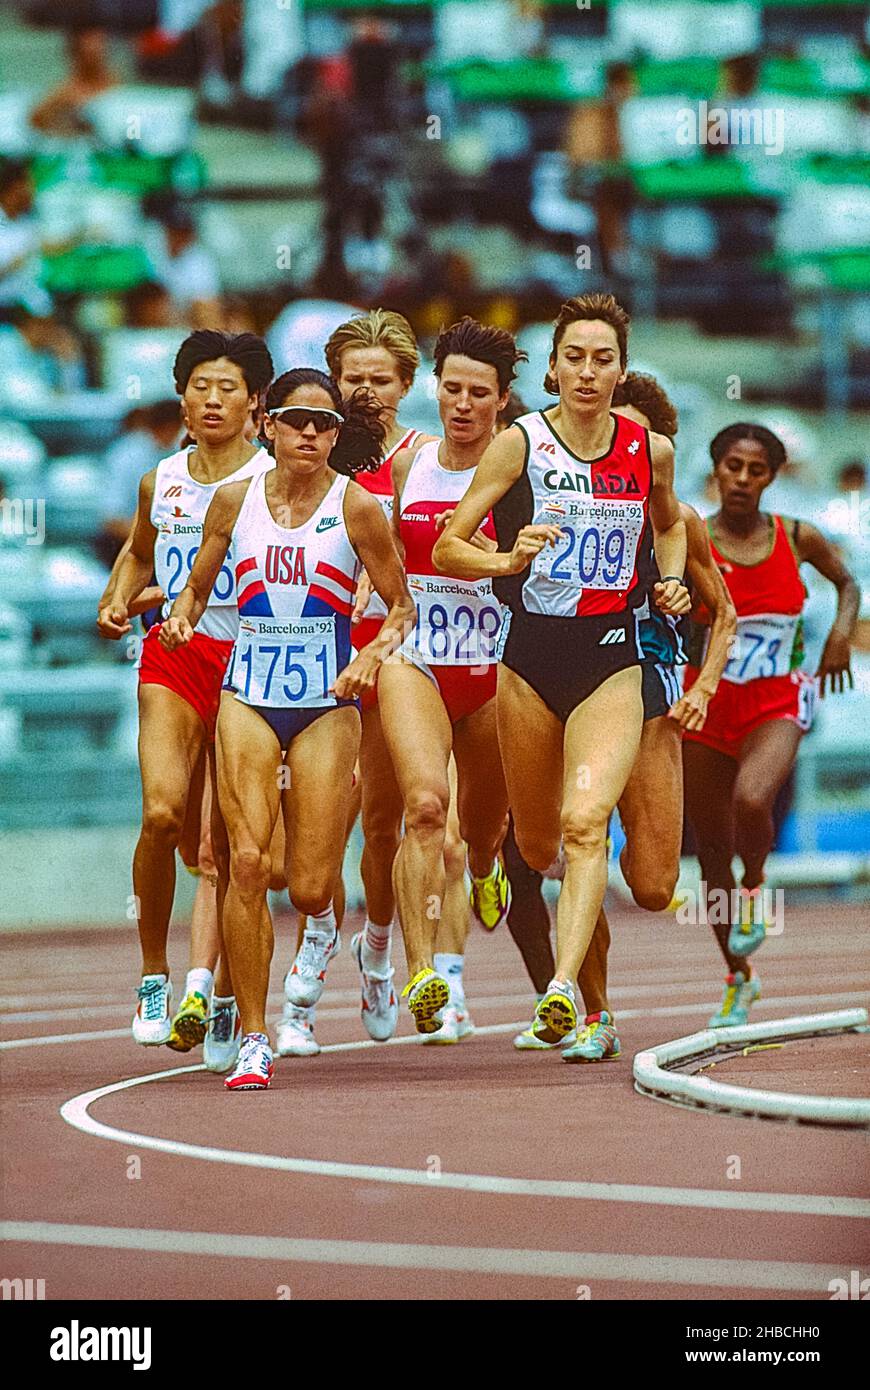 PattiSue Plumer (USA) -1751- and Theresia Kiesl (AUS-1829 and Angela Chalmers (CAN) competing in the women's 1500m R1 H3 at the 1992 Olympic Summer Games. Stock Photo